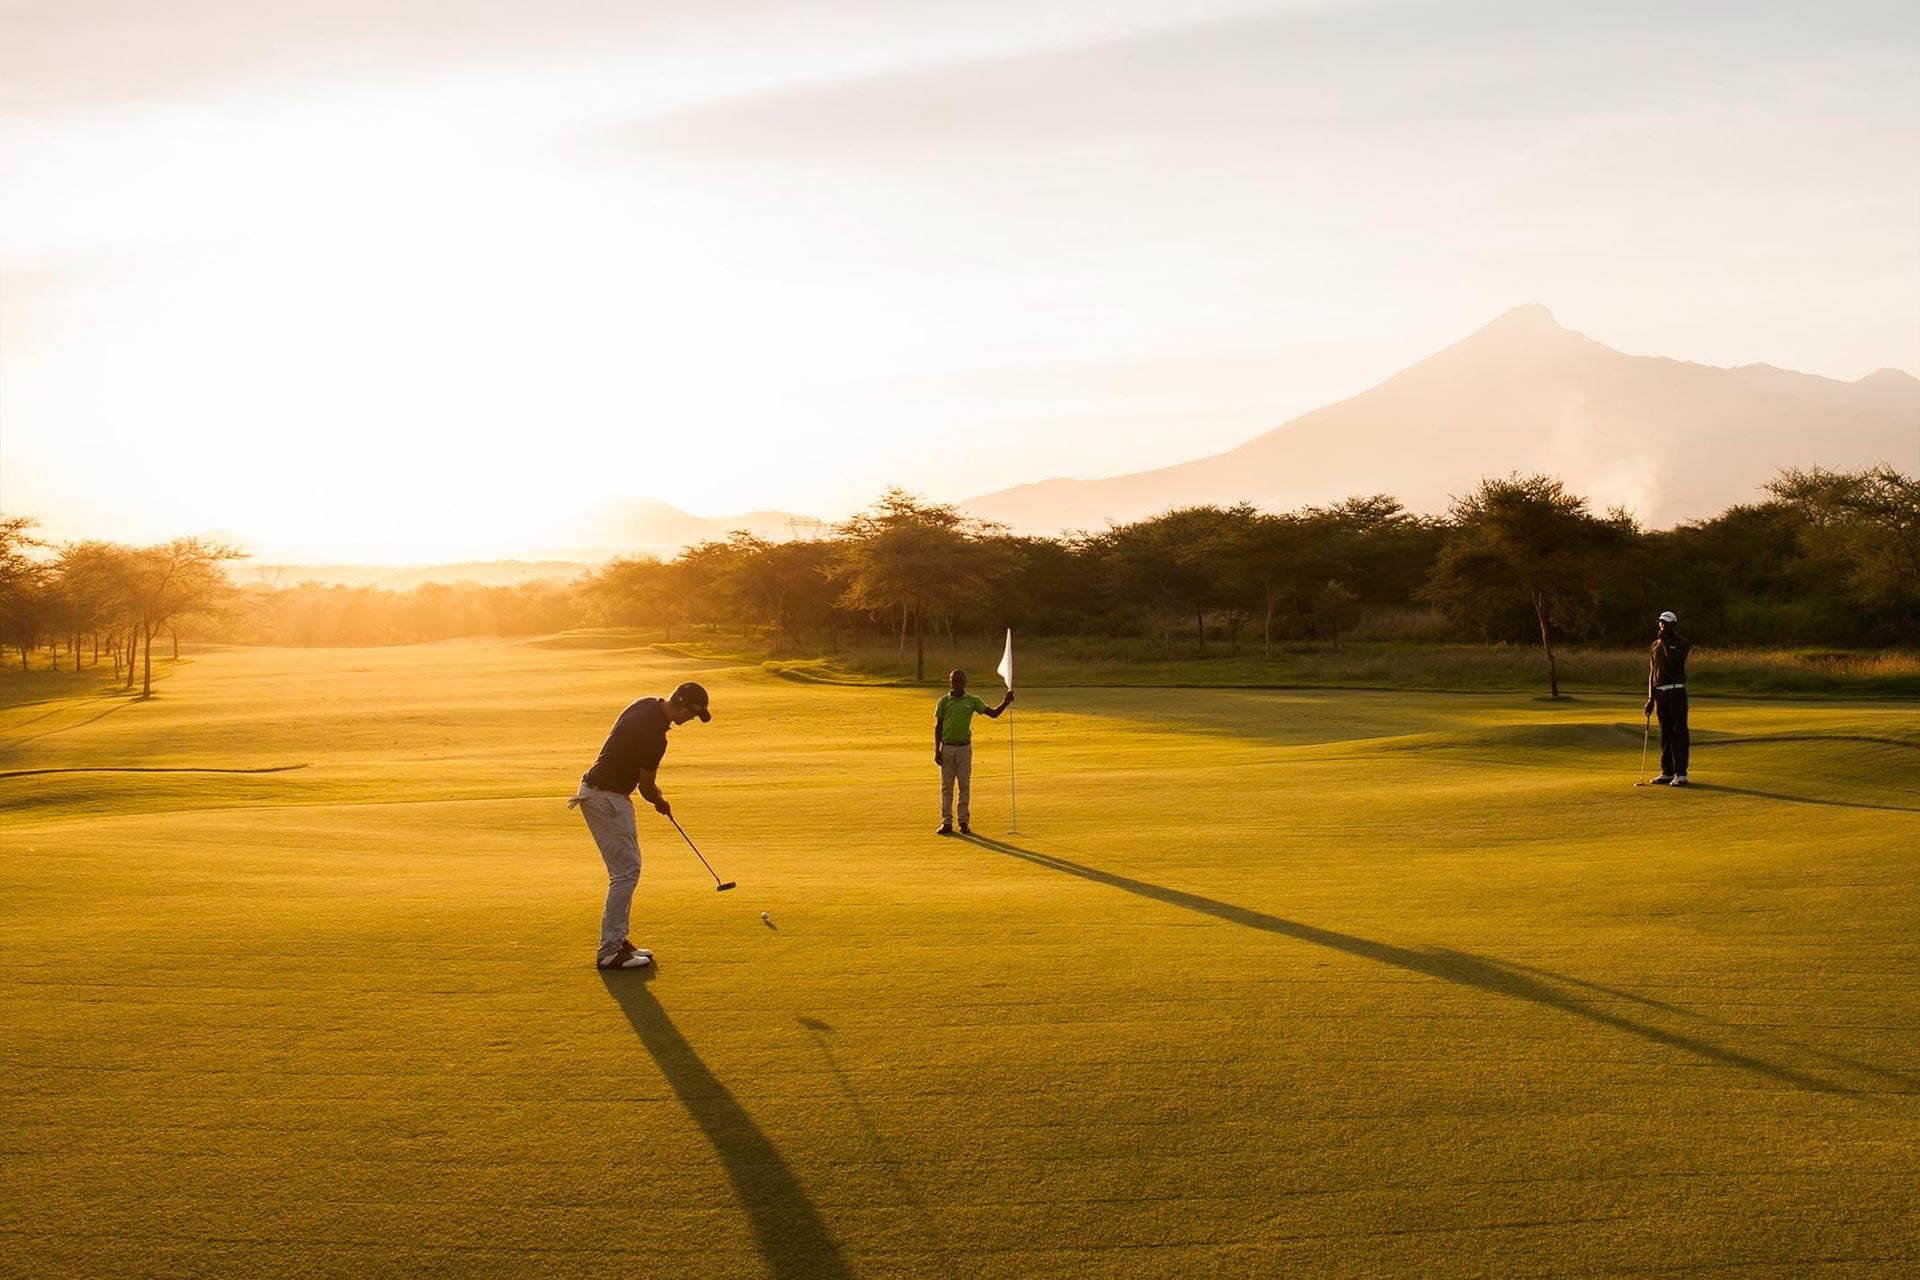  round of Golf on Kiligolf is an unforgettable and challenging journey through lush green meandering fairways, around streams and ponds, whilst skilfully avoiding Impala and Gazelle grazing on the green